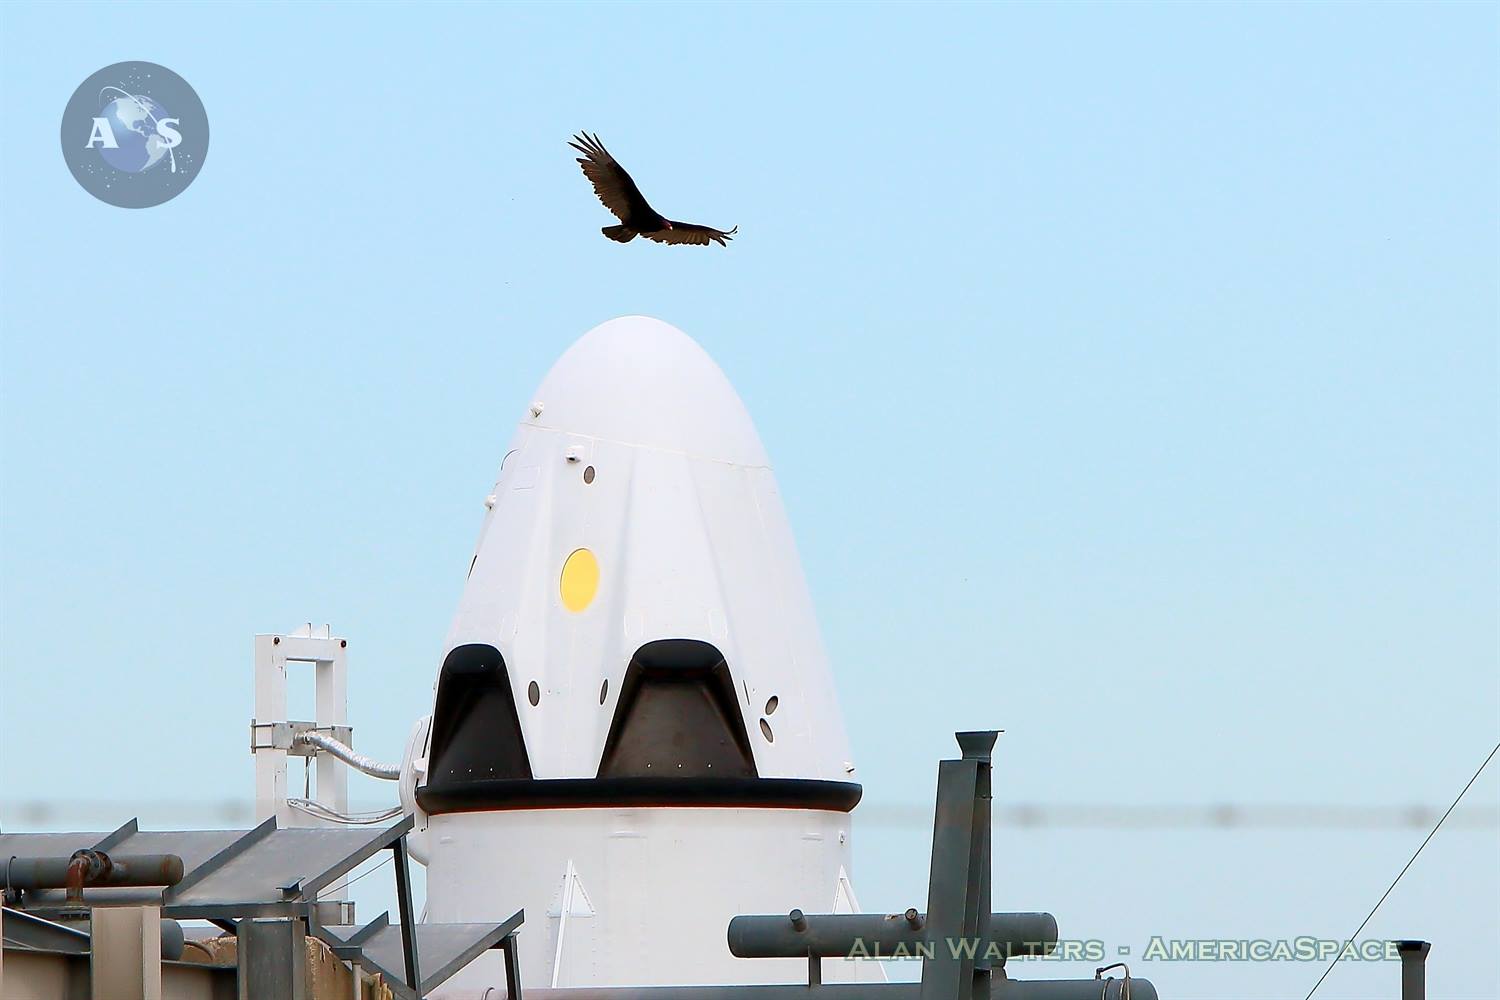 SpaceX's Crew Dragon prototype space capsule sits atop SLC-40 at Cape Canaveral AFS for a scheduled Wednesday morning Pad Abort Test. Photo Credit: Alan Walters / AmericaSpace